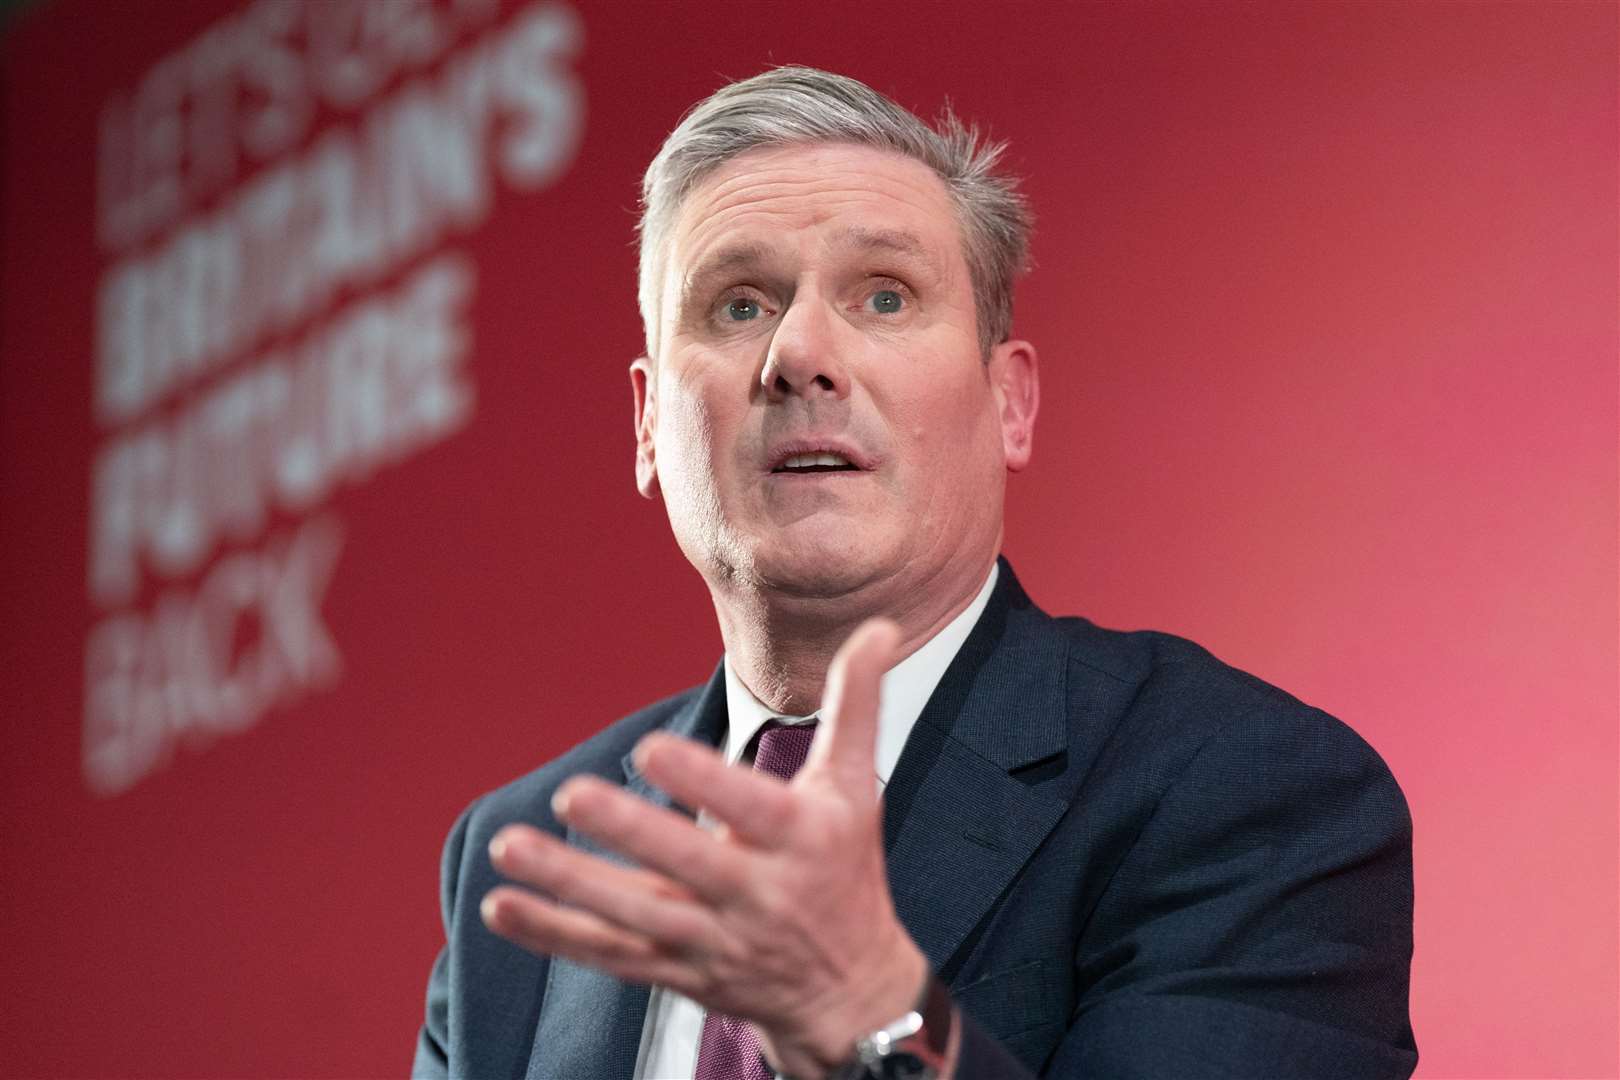 Labour leader Sir Keir Starmer is expected to announce his party is rowing back on its £28 billion green spending pledge (Stefan Rousseau/PA)